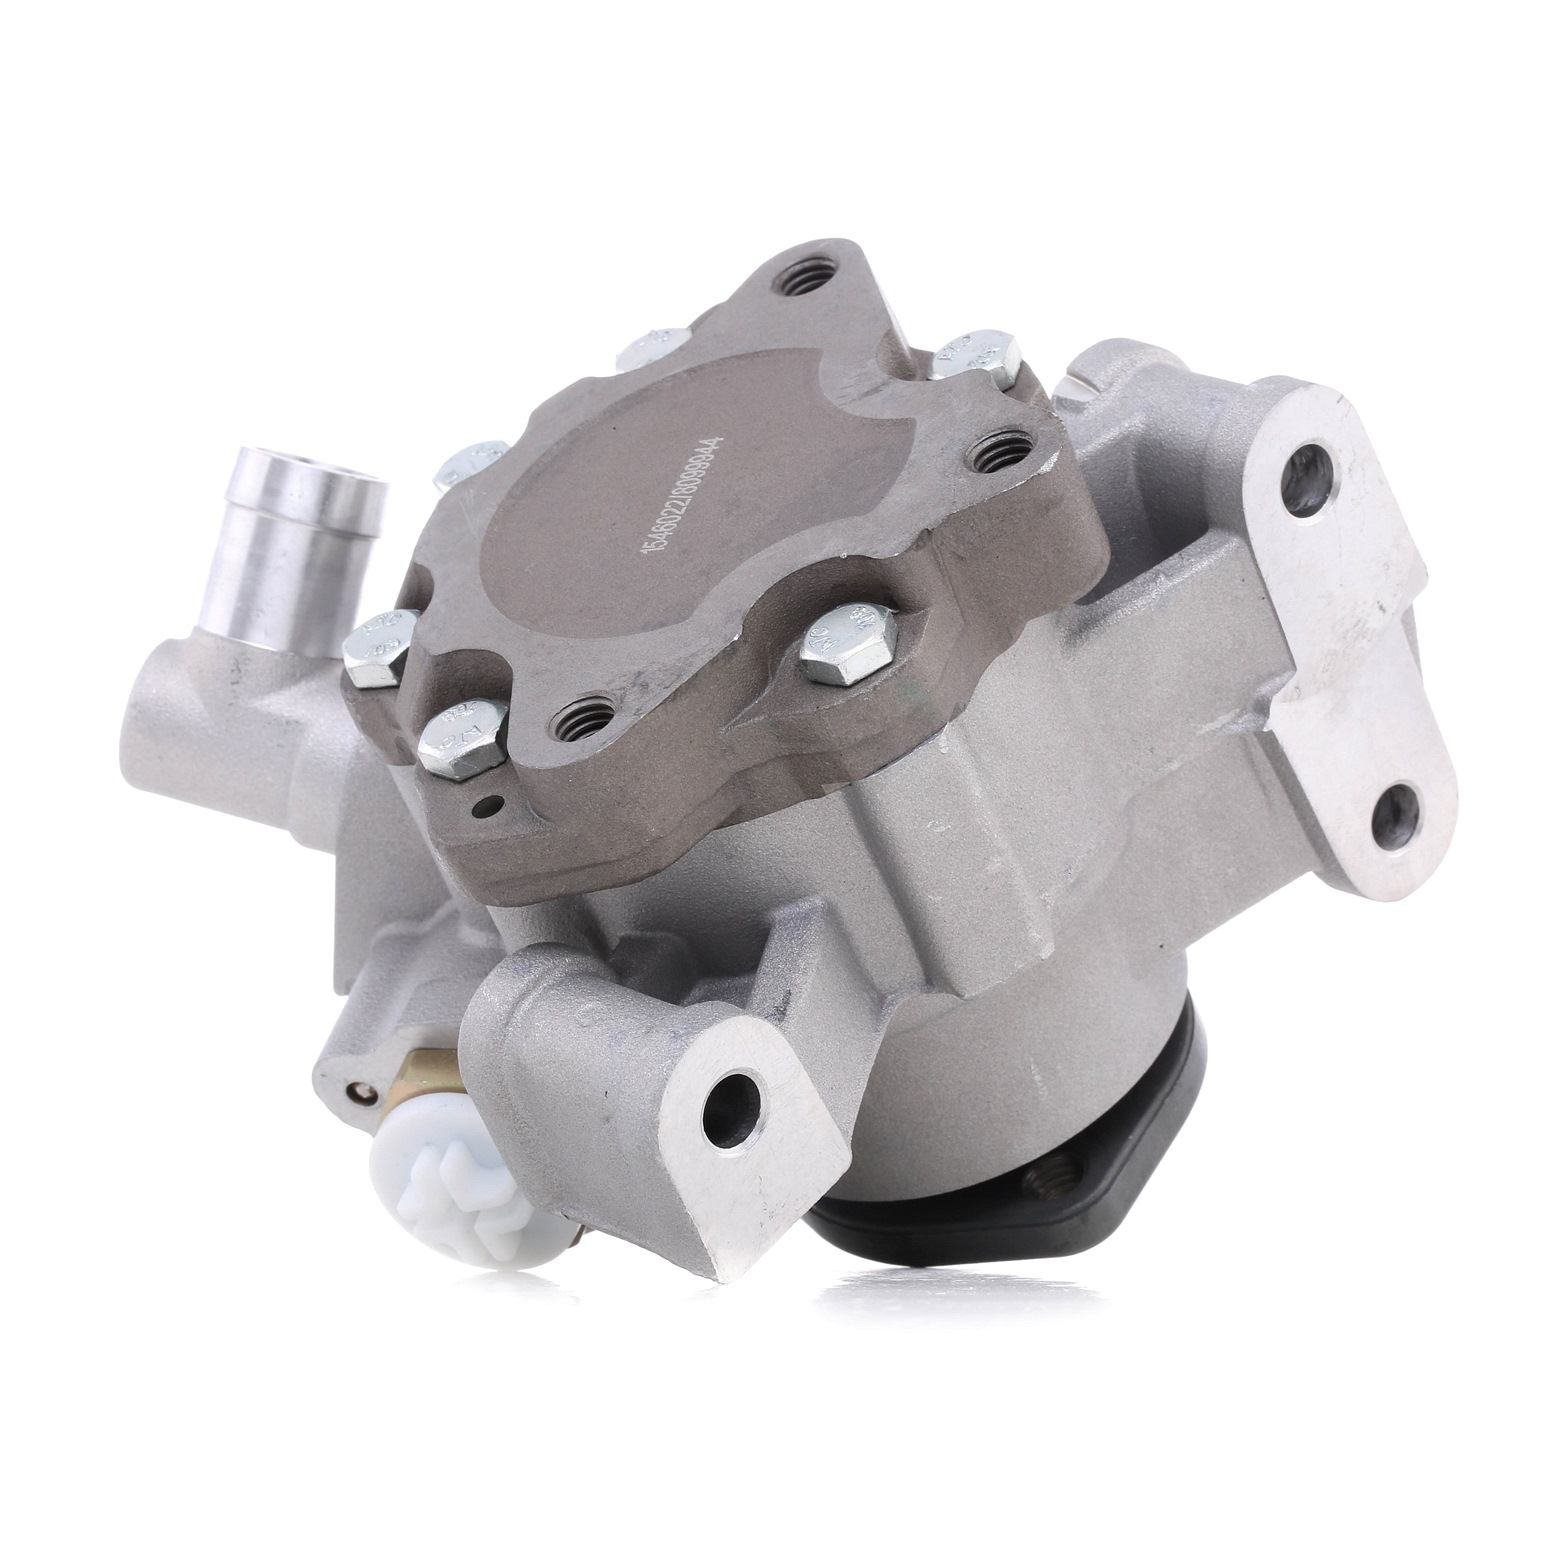 Image of RIDEX Power Steering Pump MERCEDES-BENZ 12H0004 0024669001,0024669101,0024669301 Steering Pump,EHPS,EHPS Pump,Hydraulic Pump, steering system